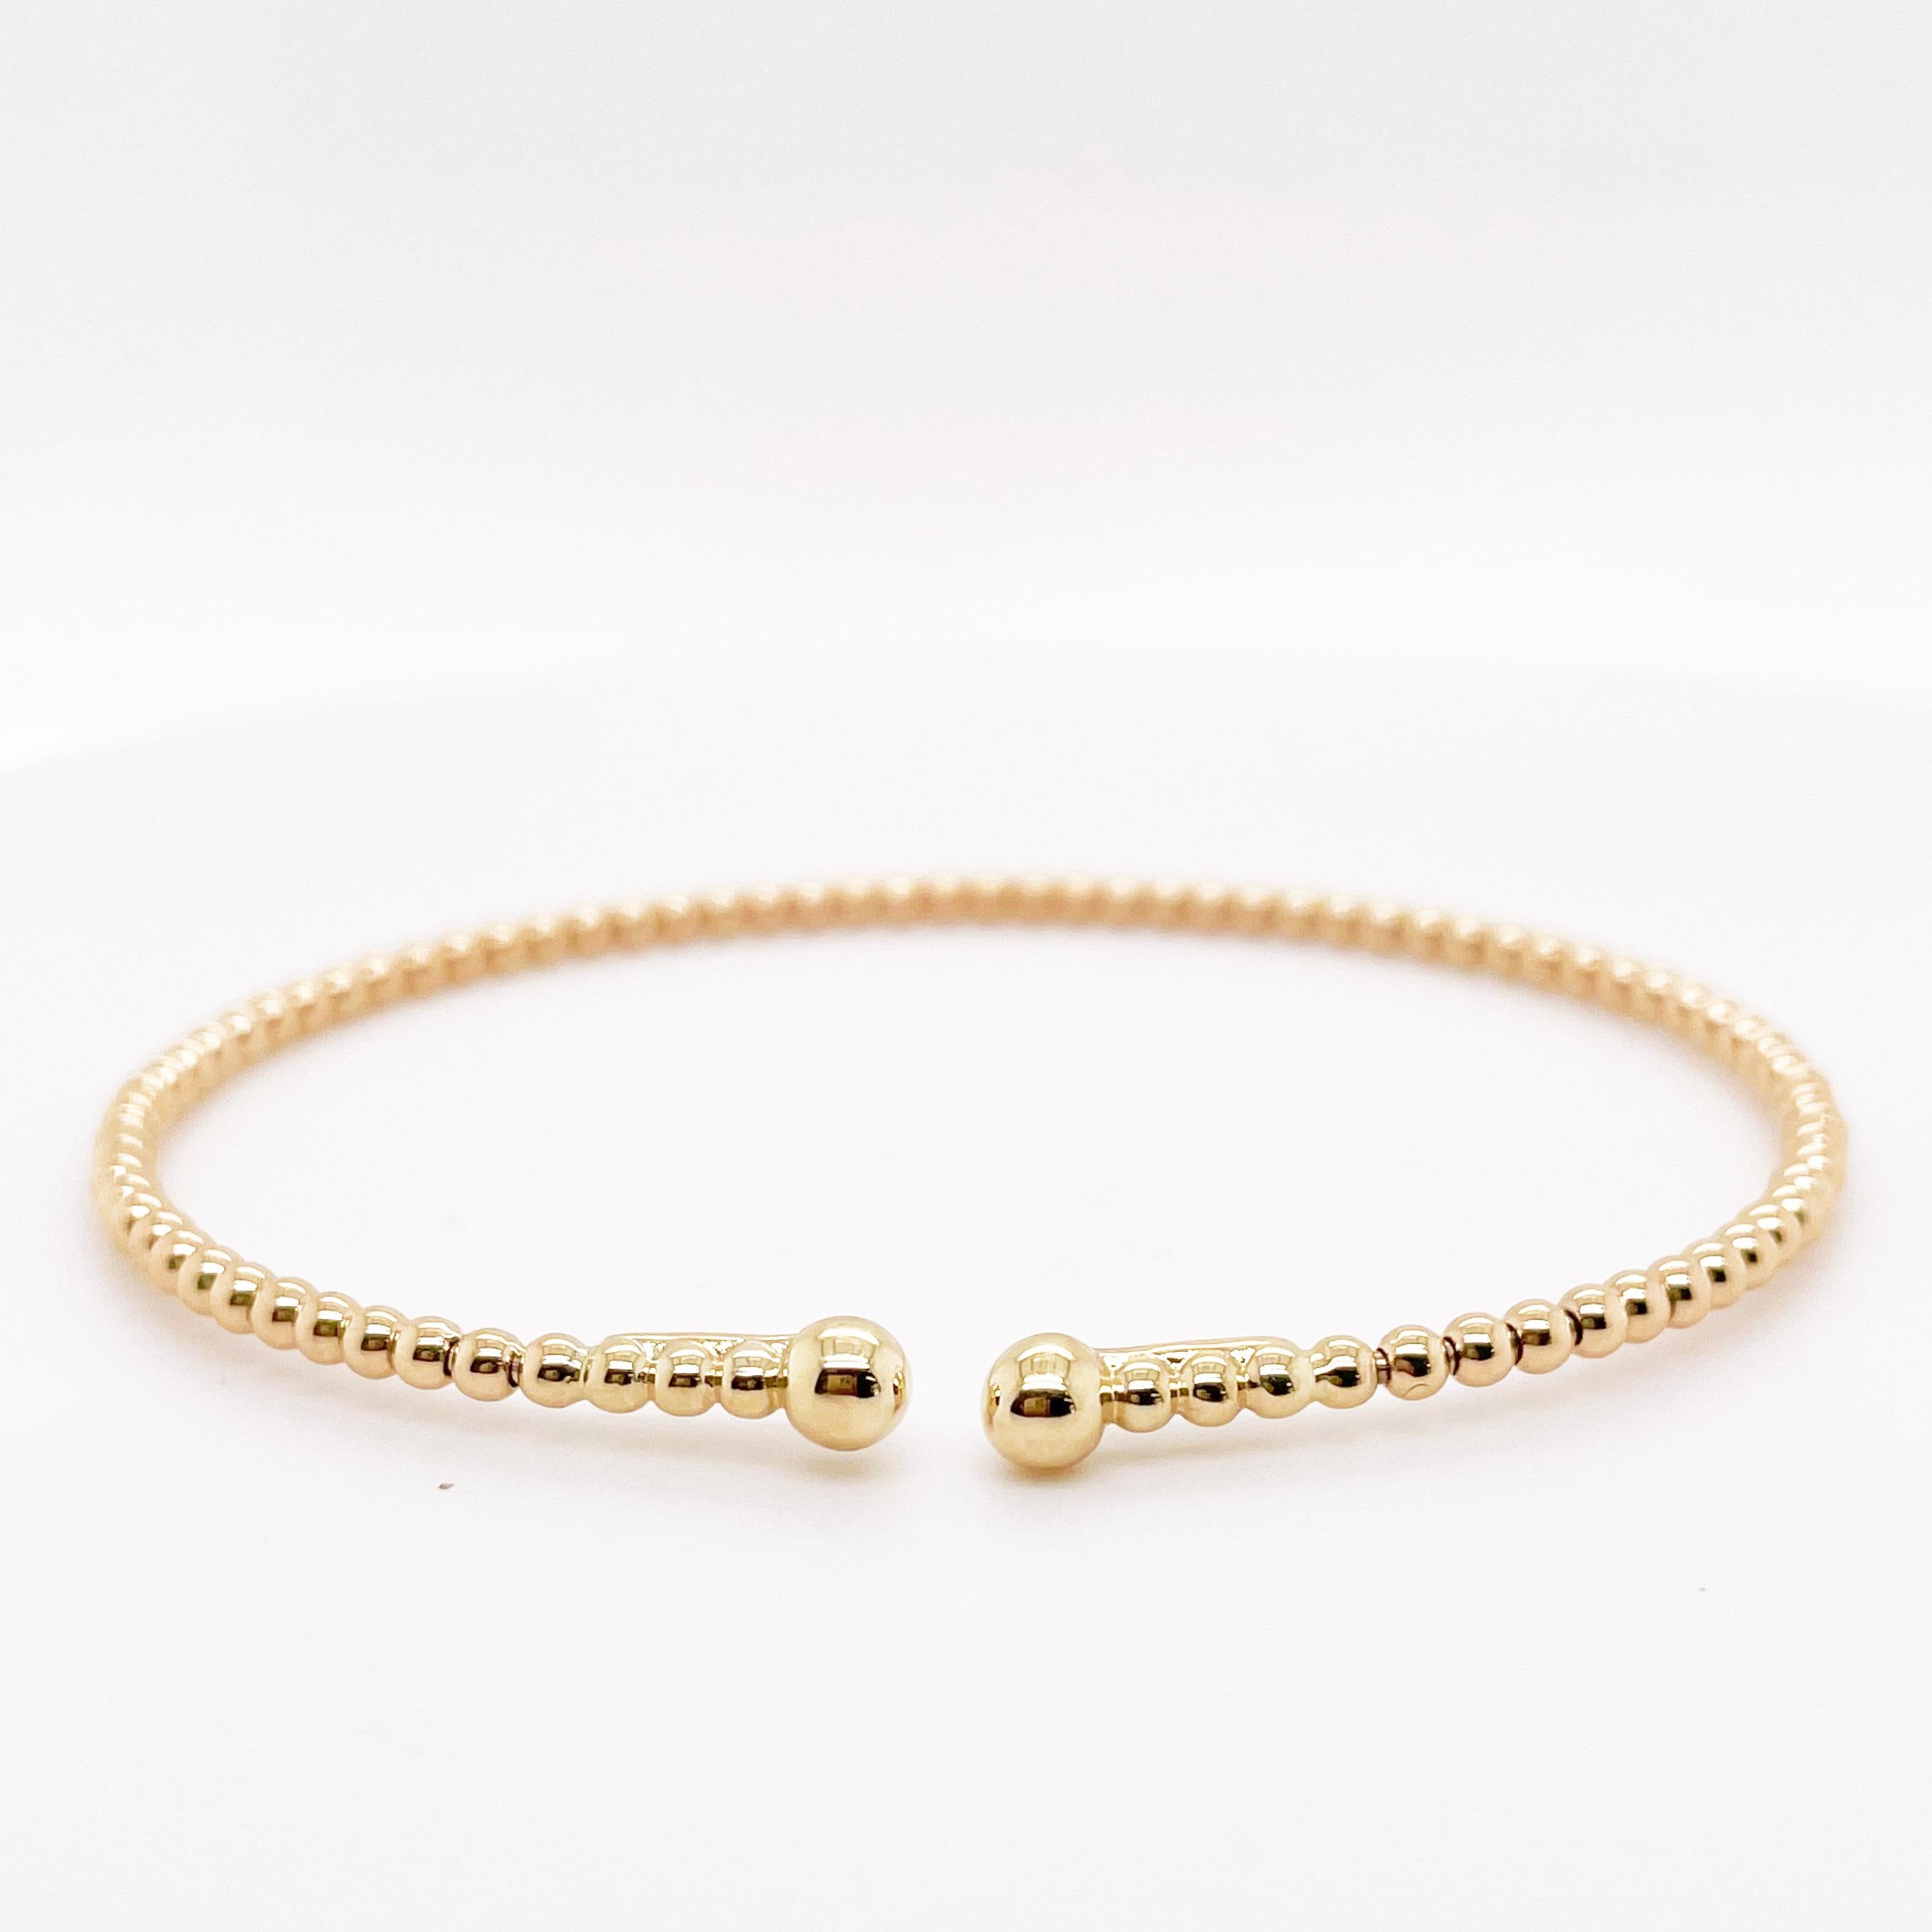 This  flexible bangle band goes with EVERYTHING! Whether you're wearing this by its self or going for a stacked look this band is the perfect fit! 
The details for this gorgeous bracelet are listed below:
Bracelet Type: Bangle, Cuff
Metal Quality: